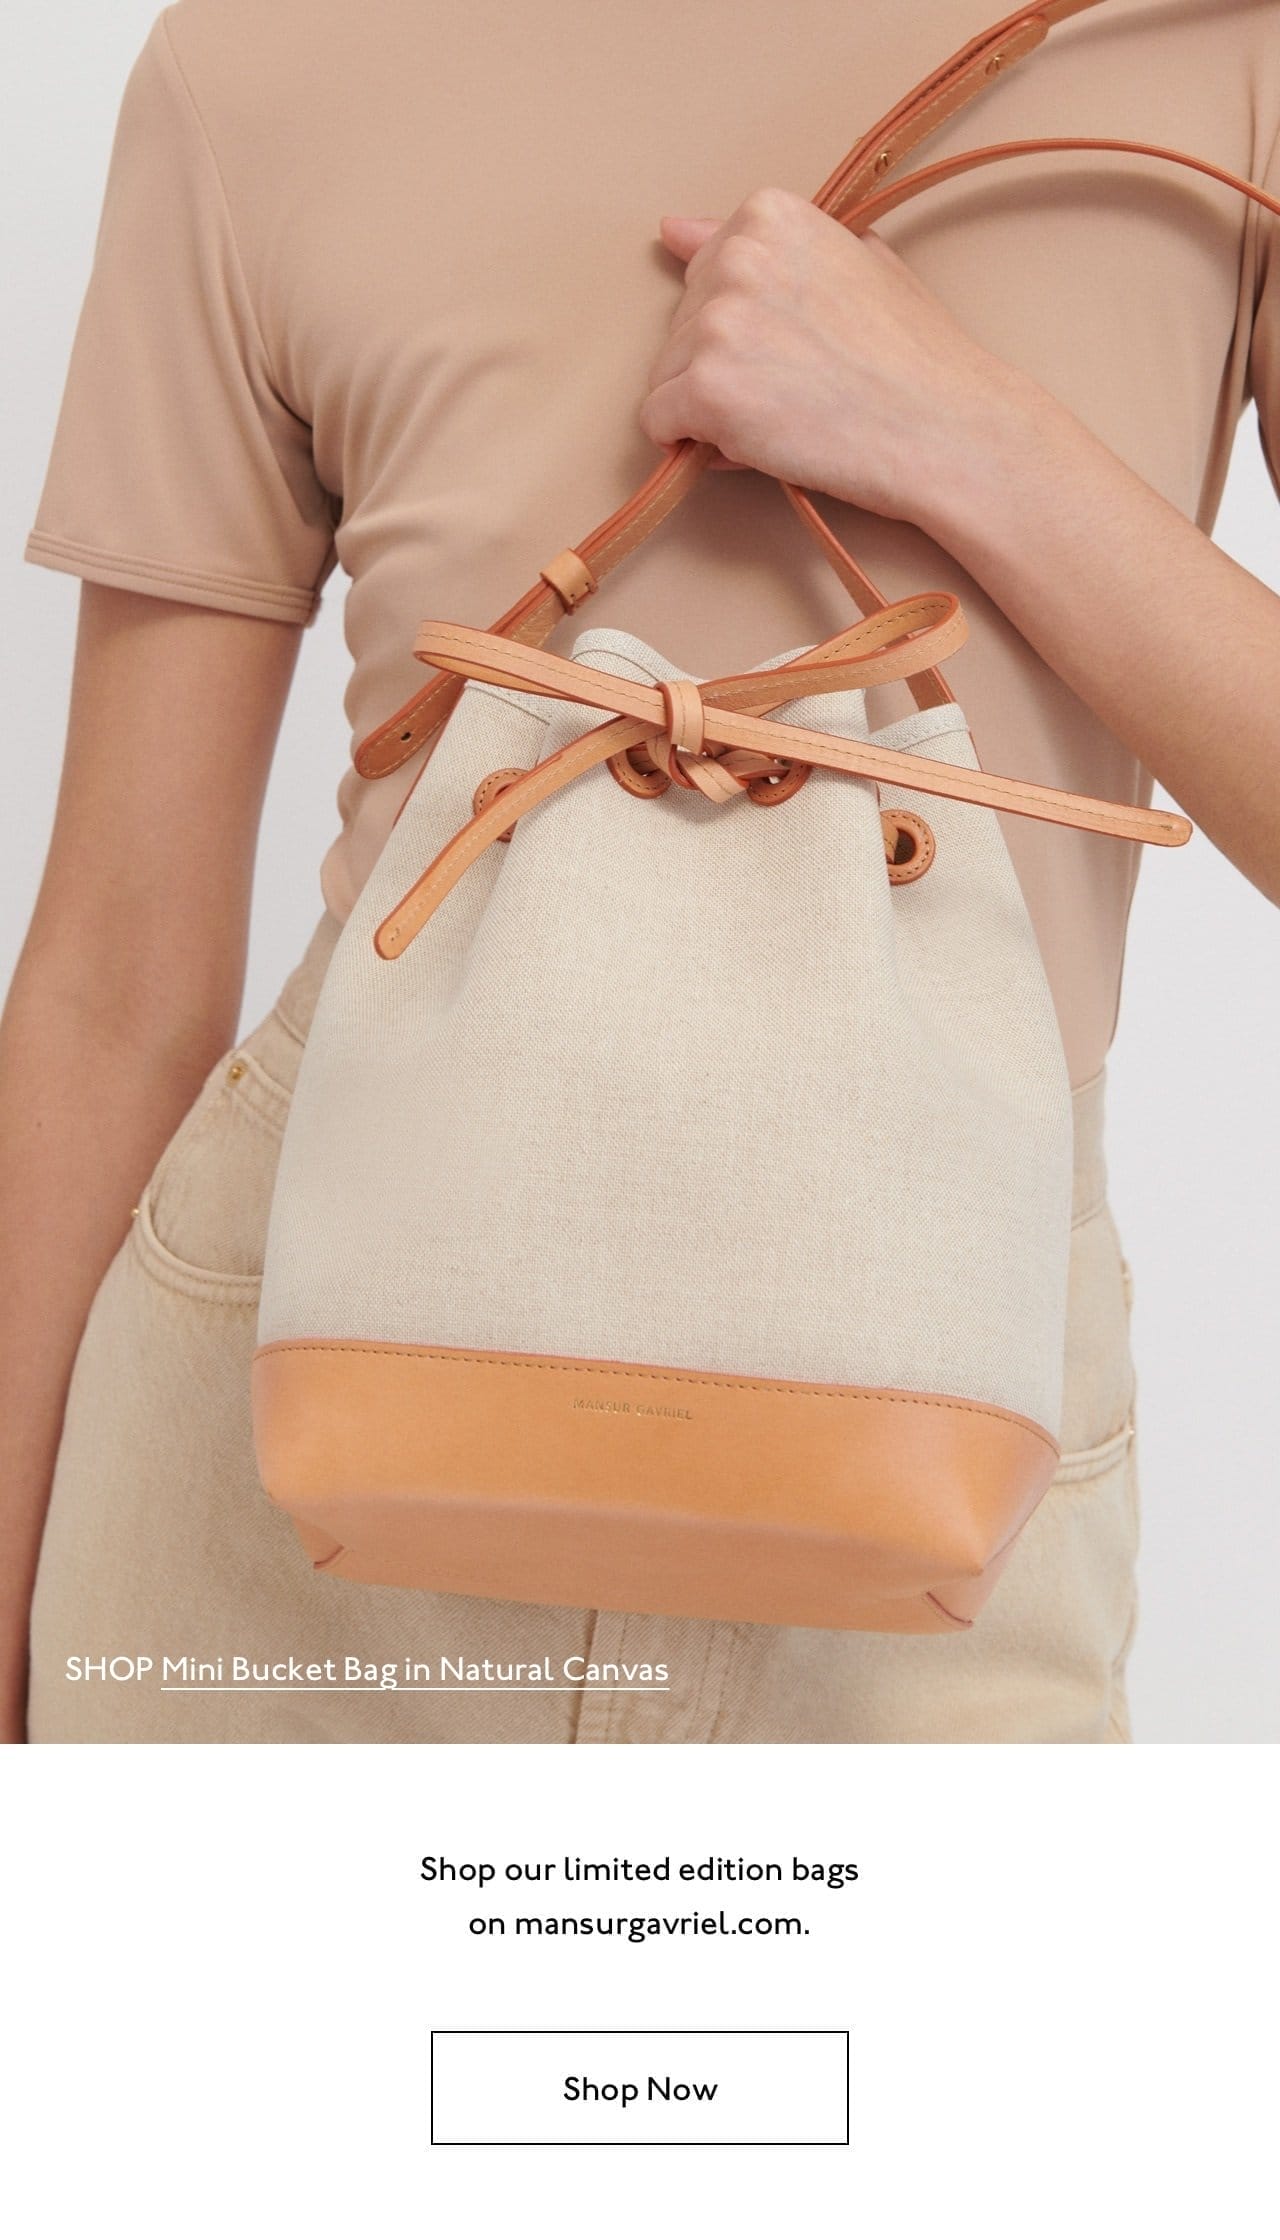 The new fabrication is perfetly lightweight and soft, yet durable. Shop our limited edition bags on mansurgavriel.com.